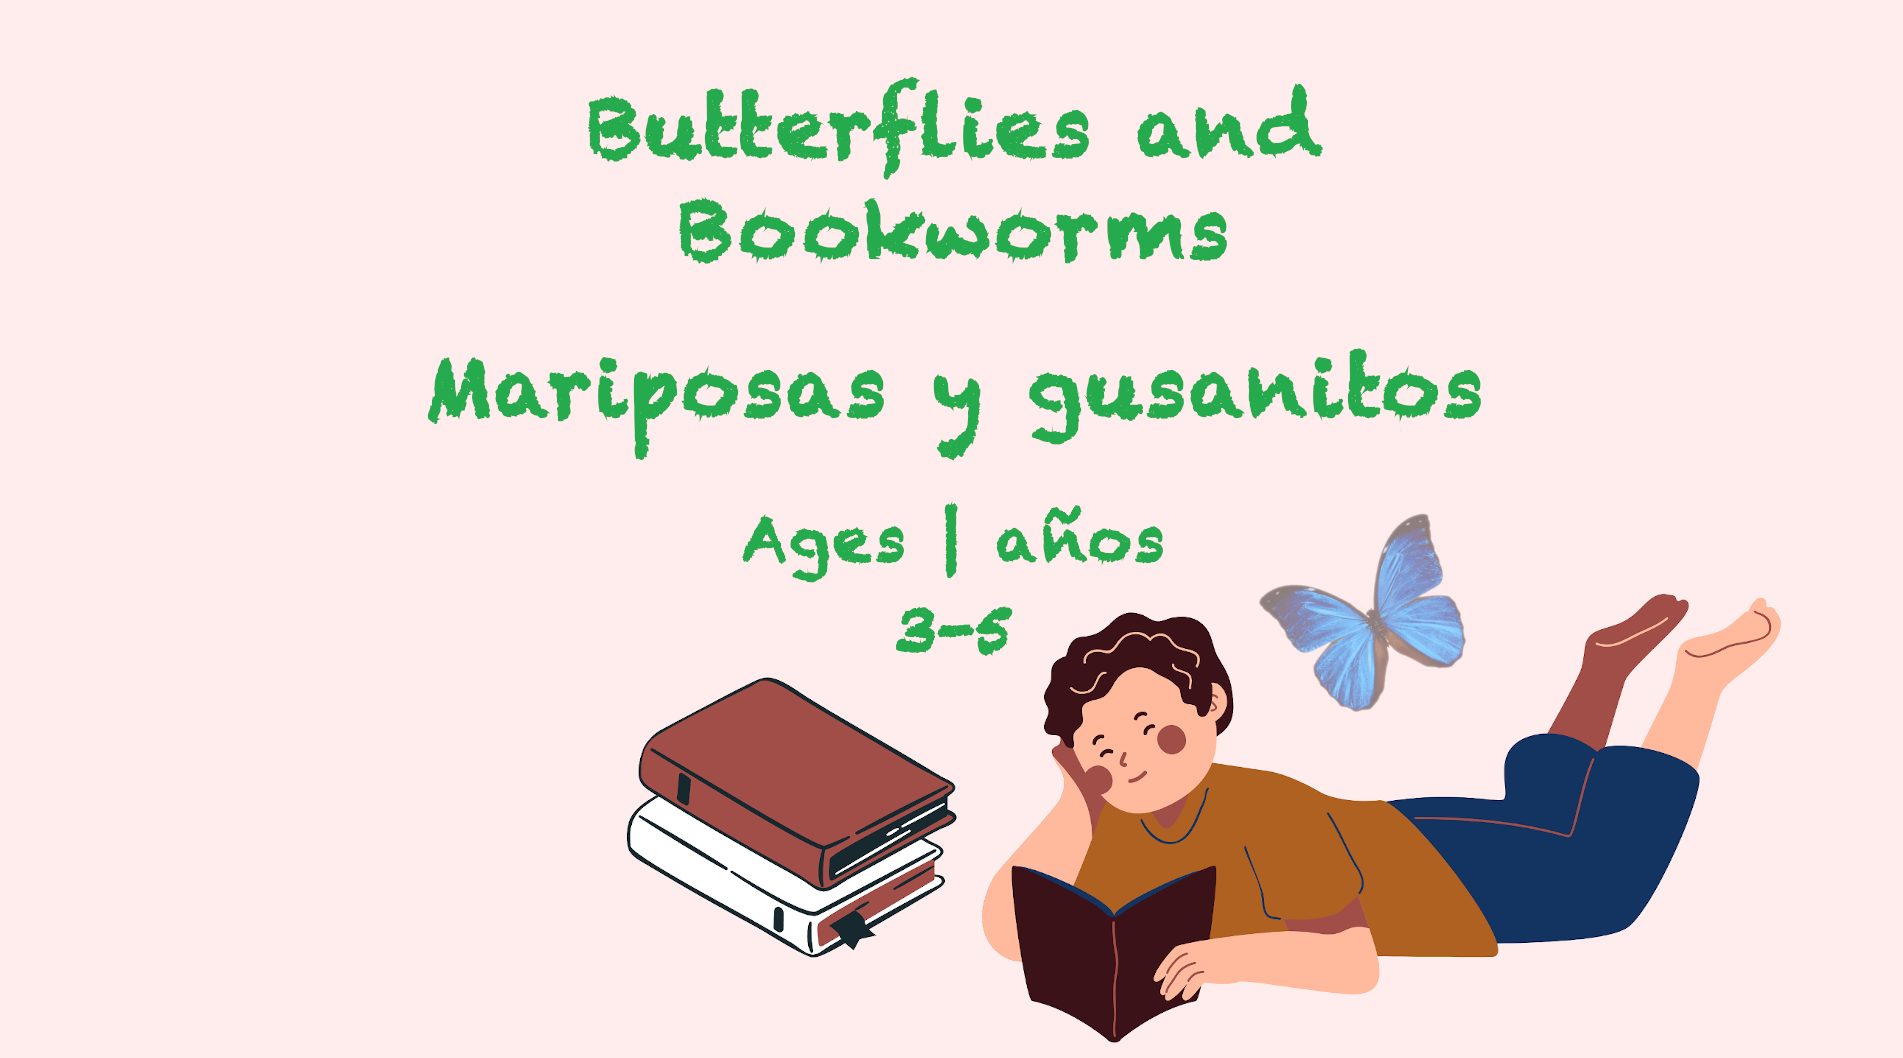 Butterflies and Bookworms for 3-5 year olds